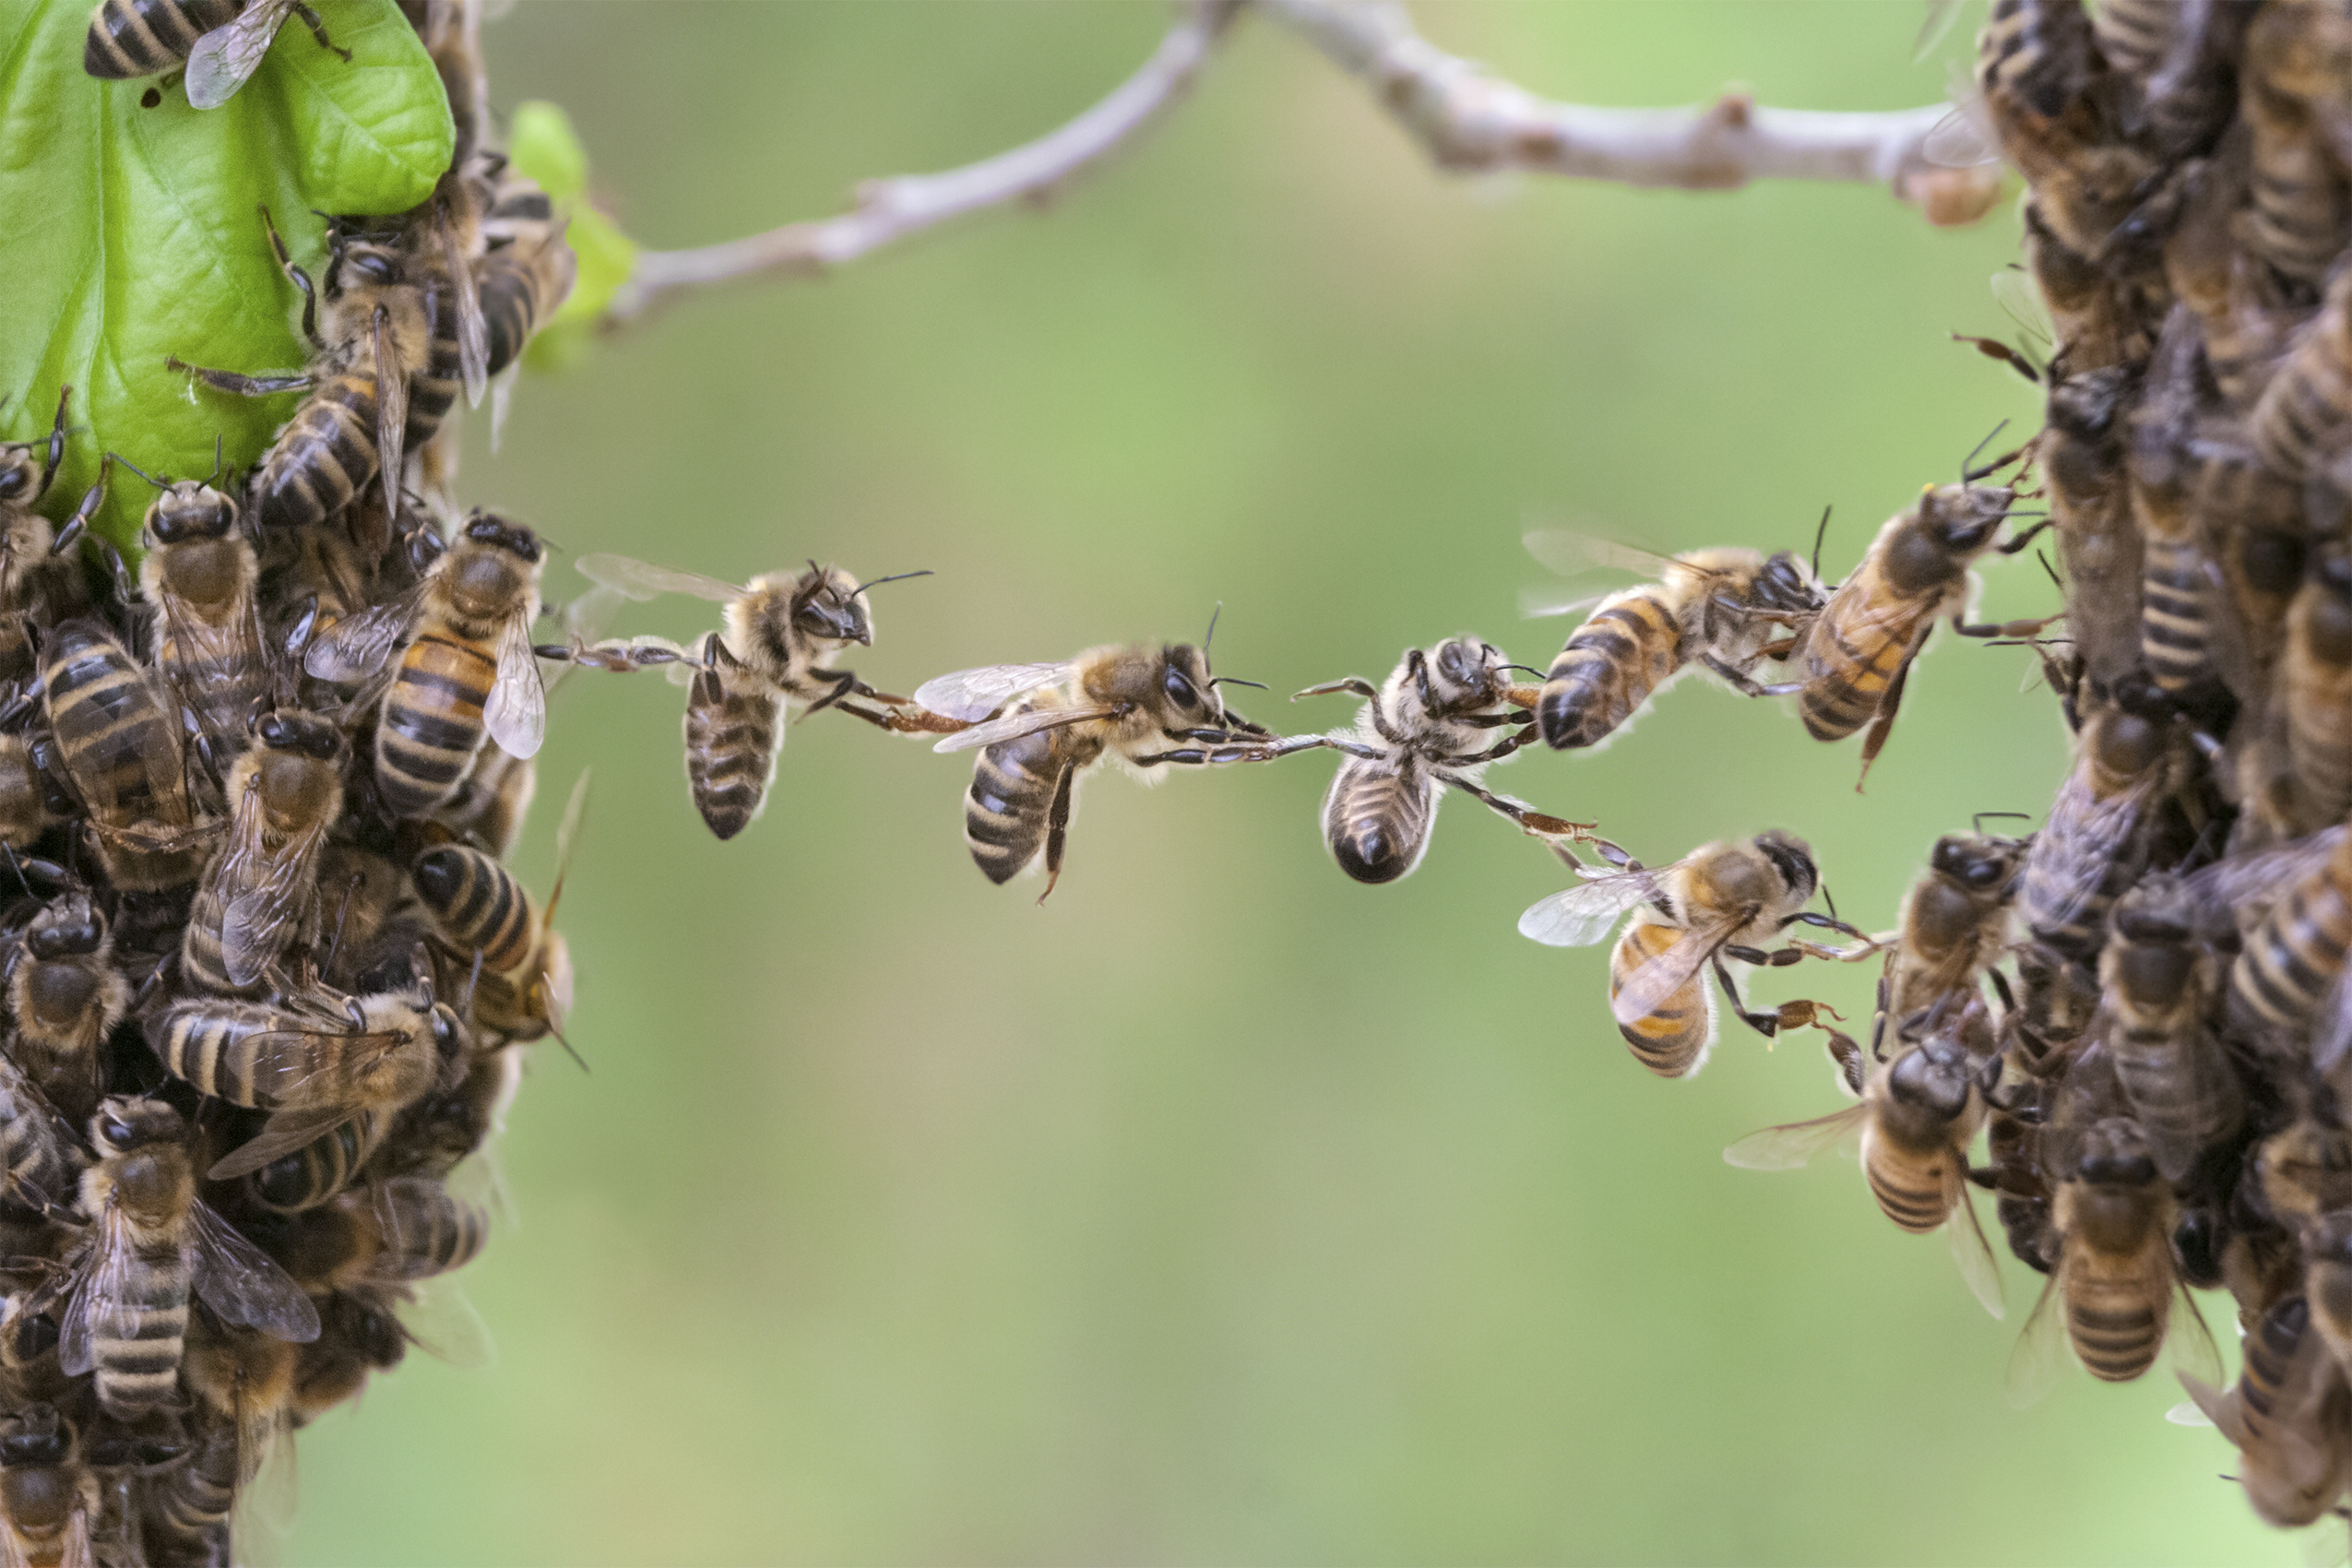 Bees linking two swarms